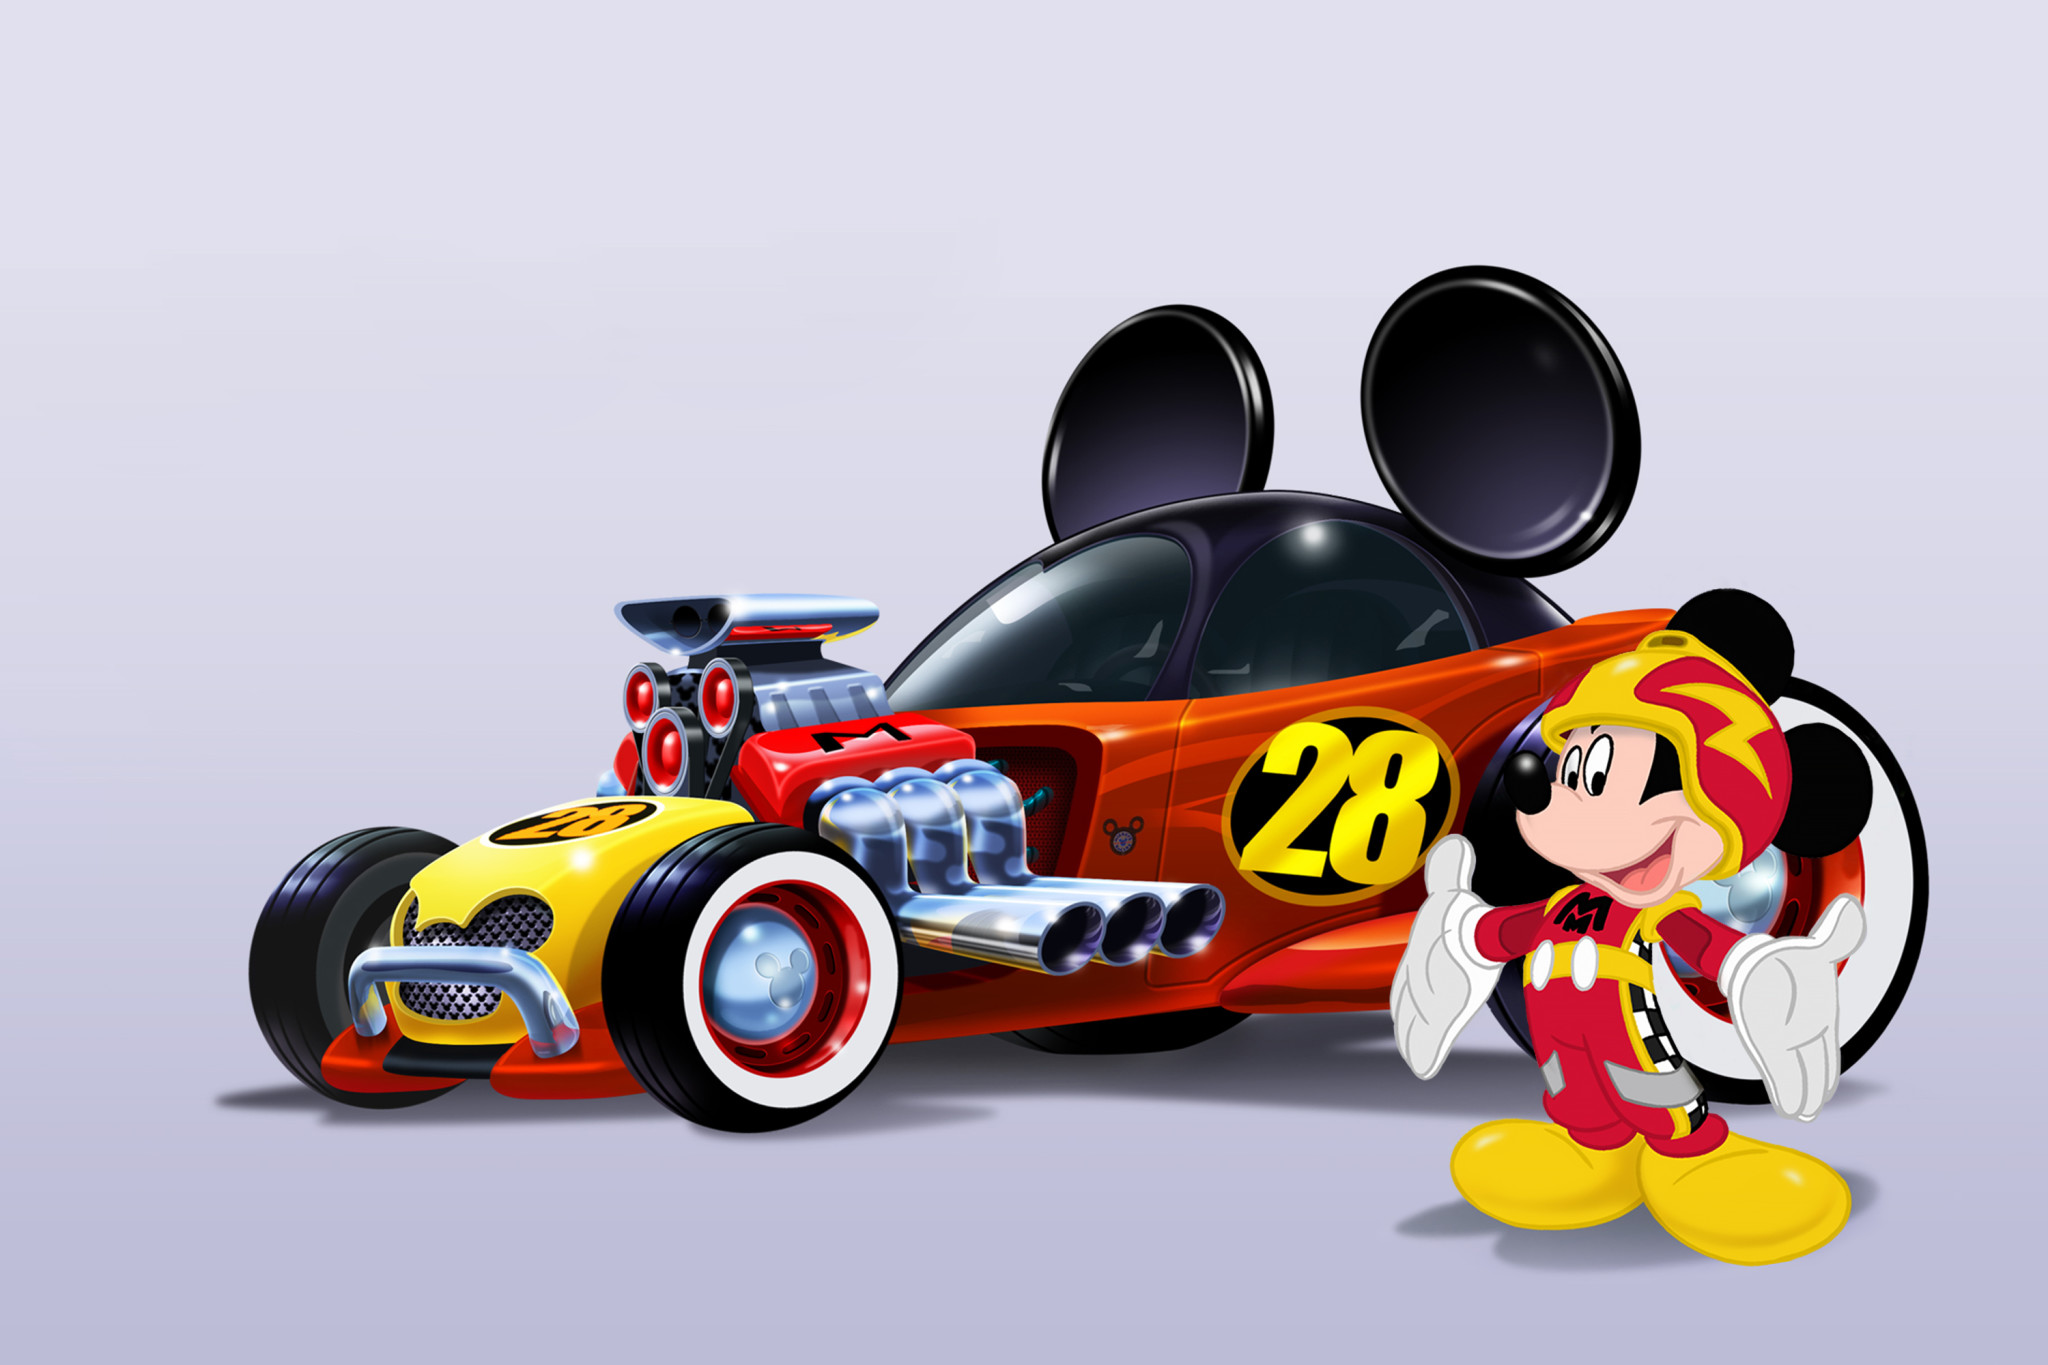 “Mickey and the Roadster Racers” is Coming to Disney Junior